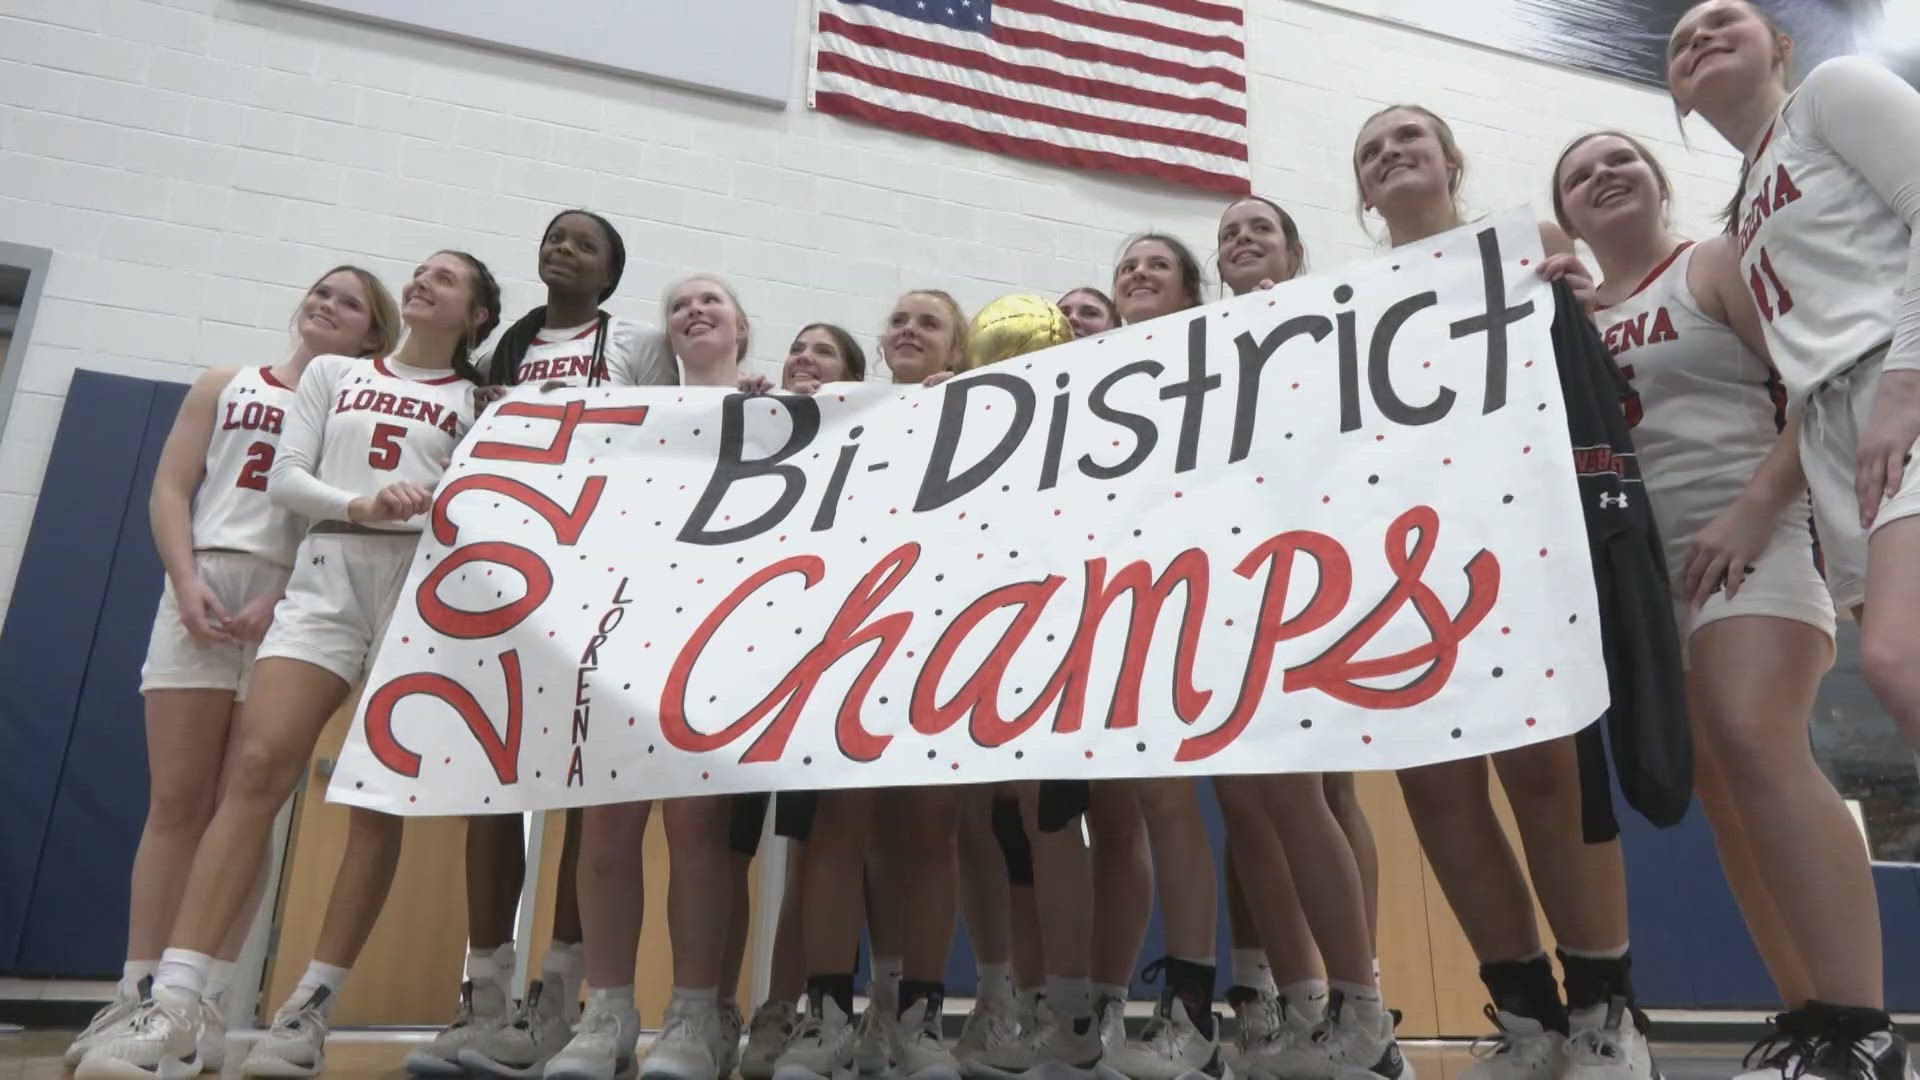 The Leopards took home the Bi-District Title with a 55-19 final score.